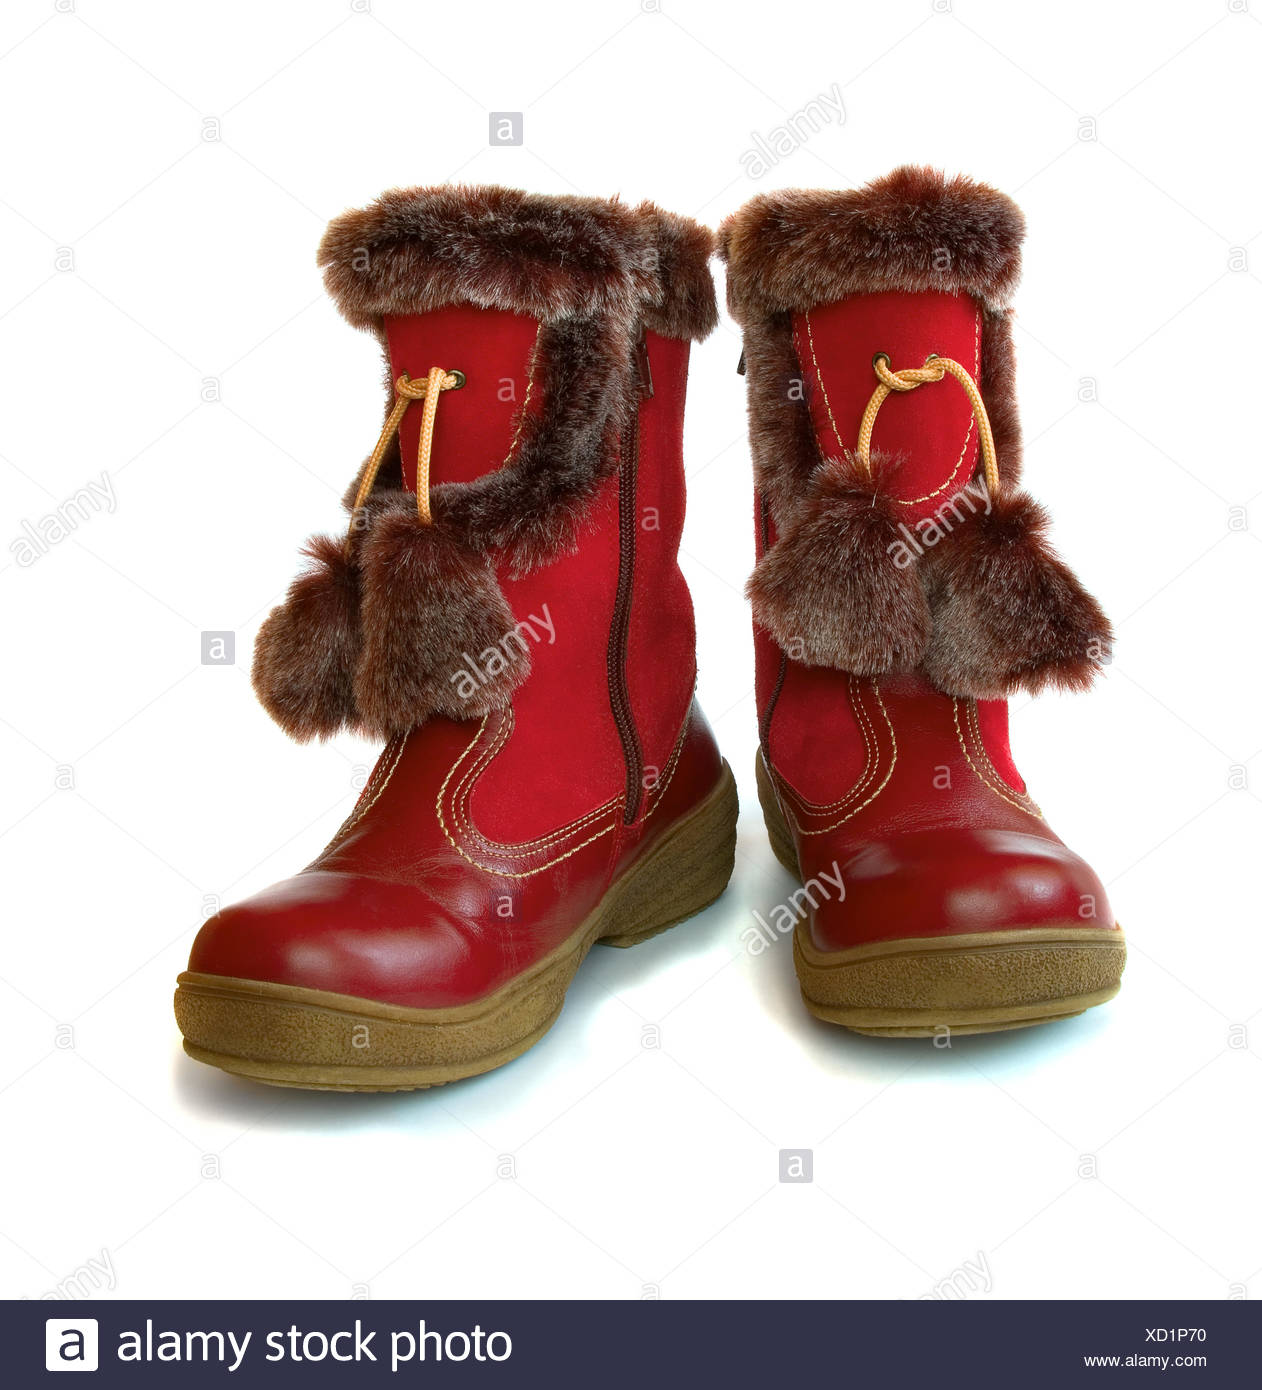 childrens boots